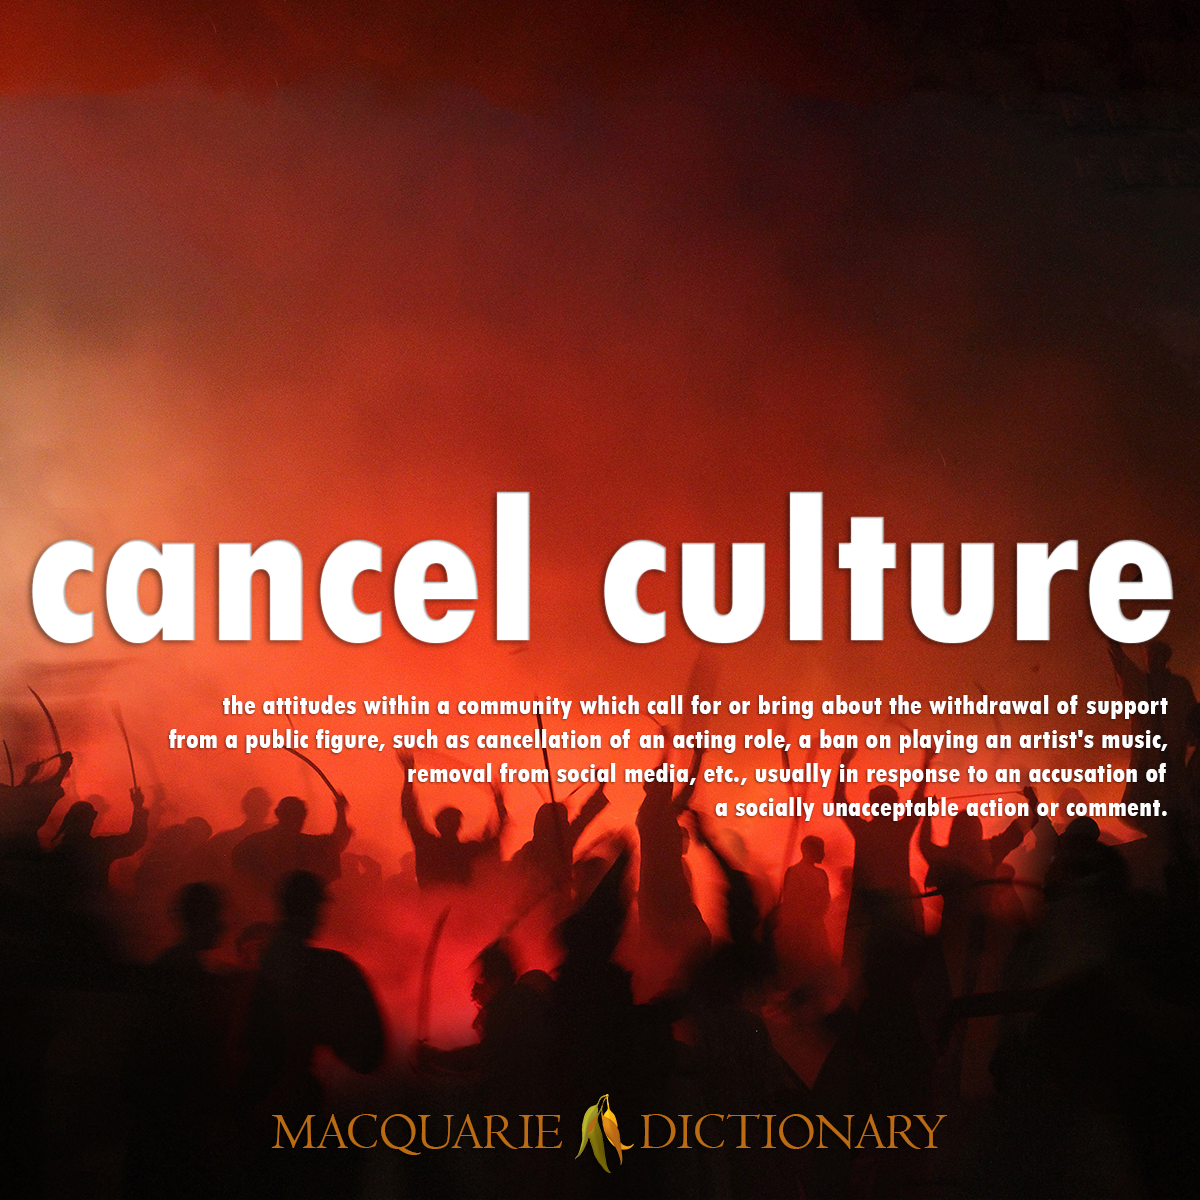 Image of Word of the Year - Macquarie Dictionary - cancel culture - the attitudes within a community which call for or bring about the withdrawal of support from a public figure